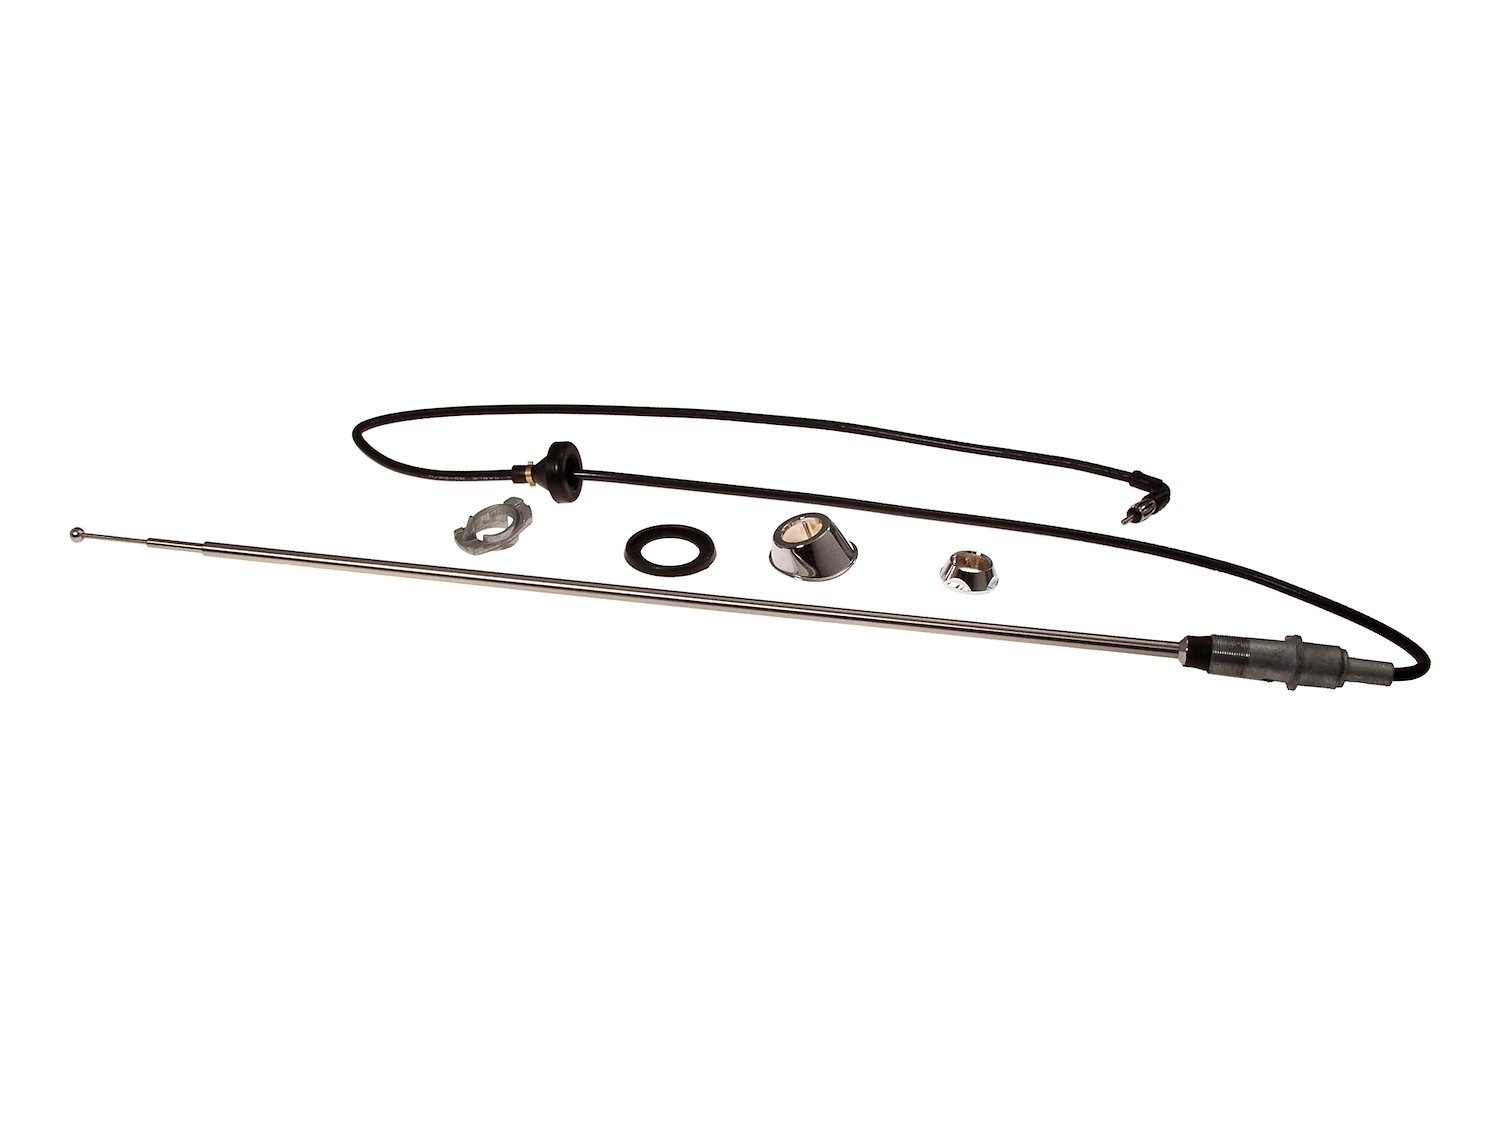 Antenna - OE-Style for 1964-1965 Ford Falcon